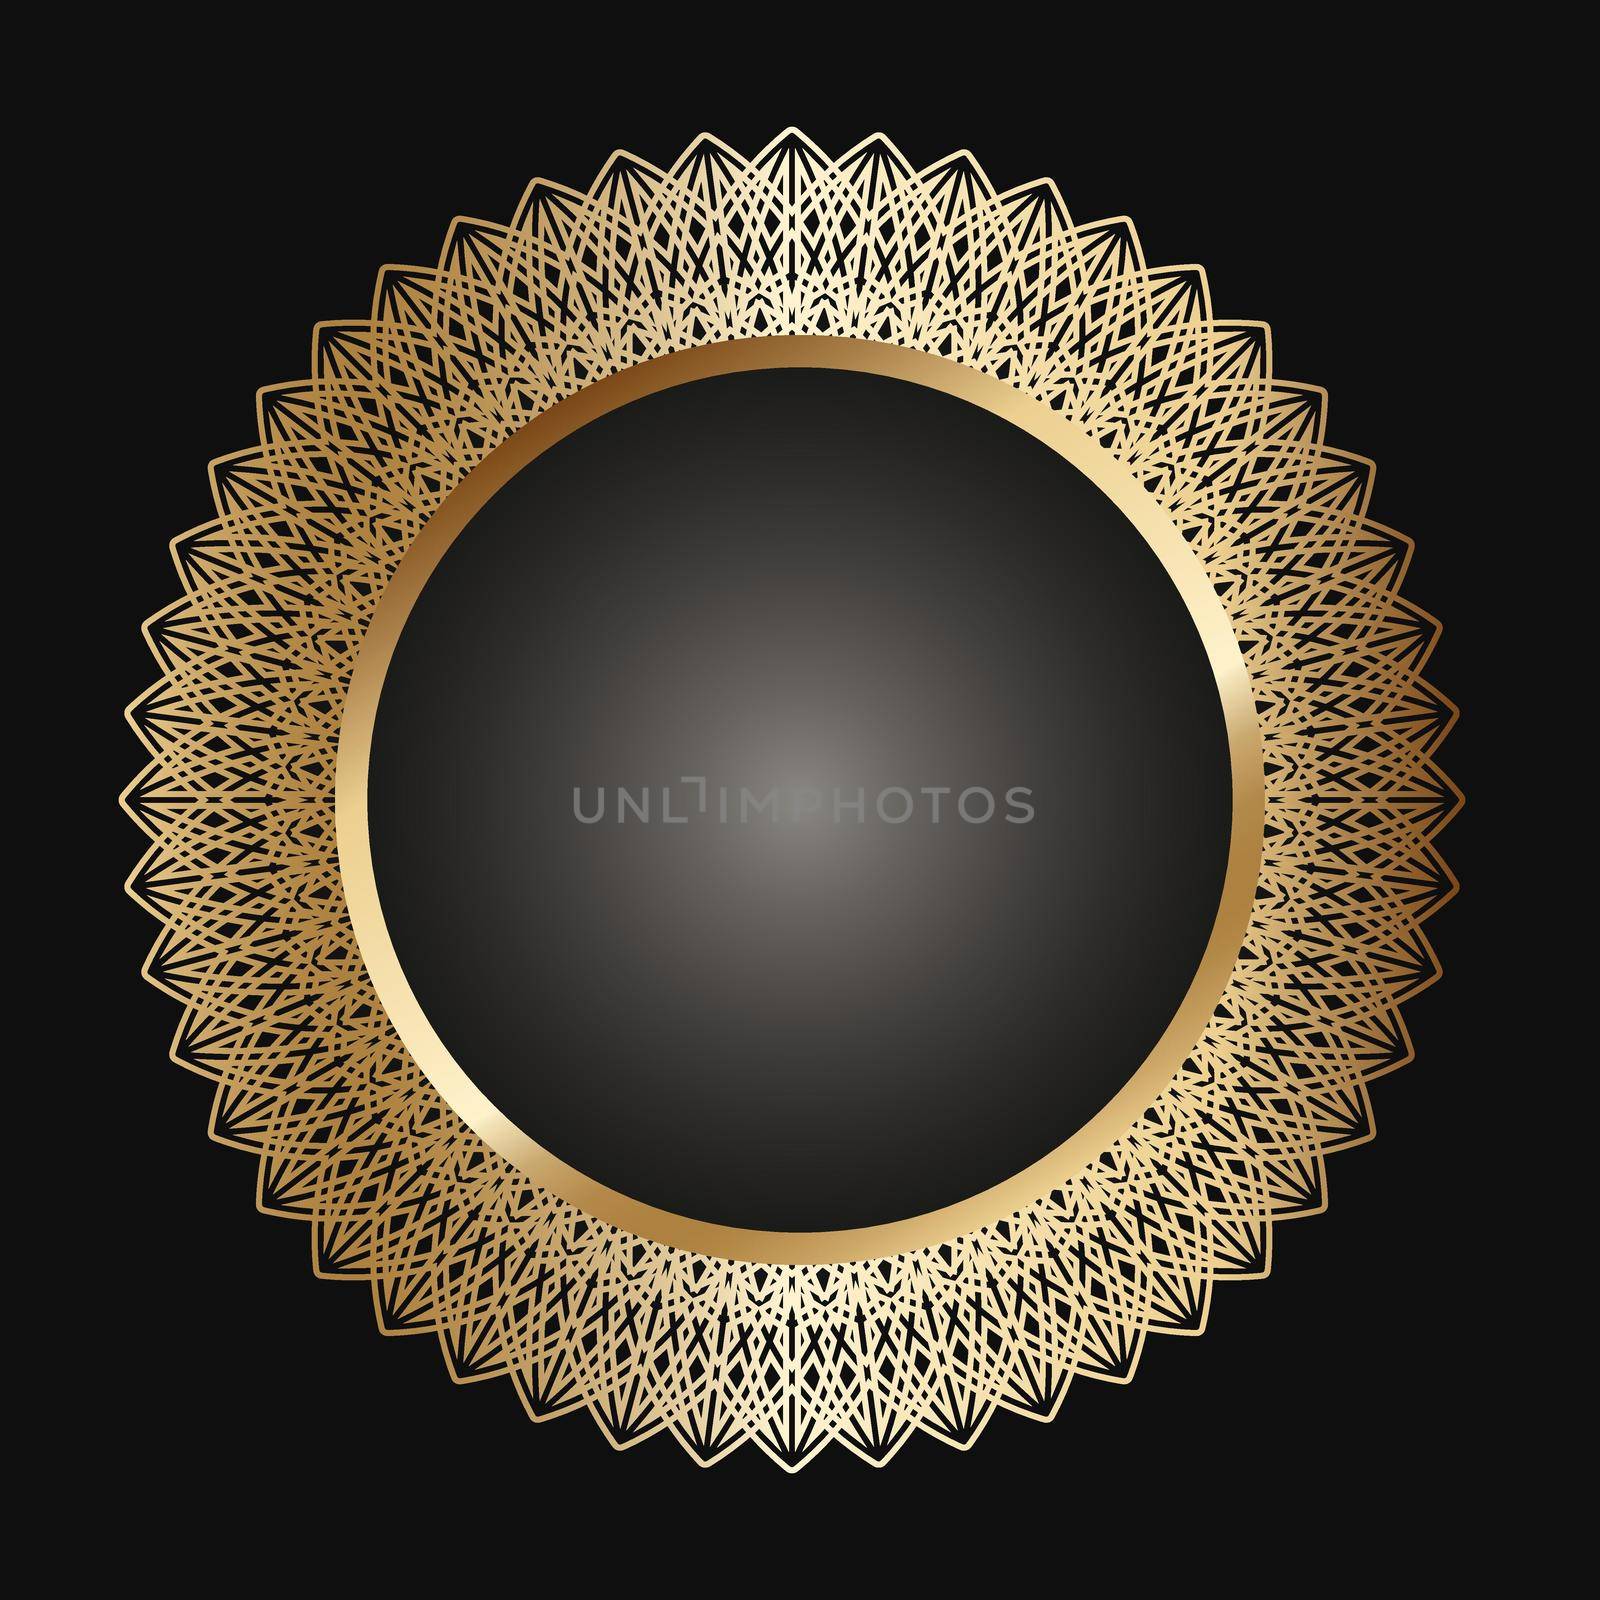 Golden frame with lace ornament in circle on black background. Art deco. Luxury gold round mandala, hand draw design. Ethnic motif. Abstract vector illustration.Template design for invitation.